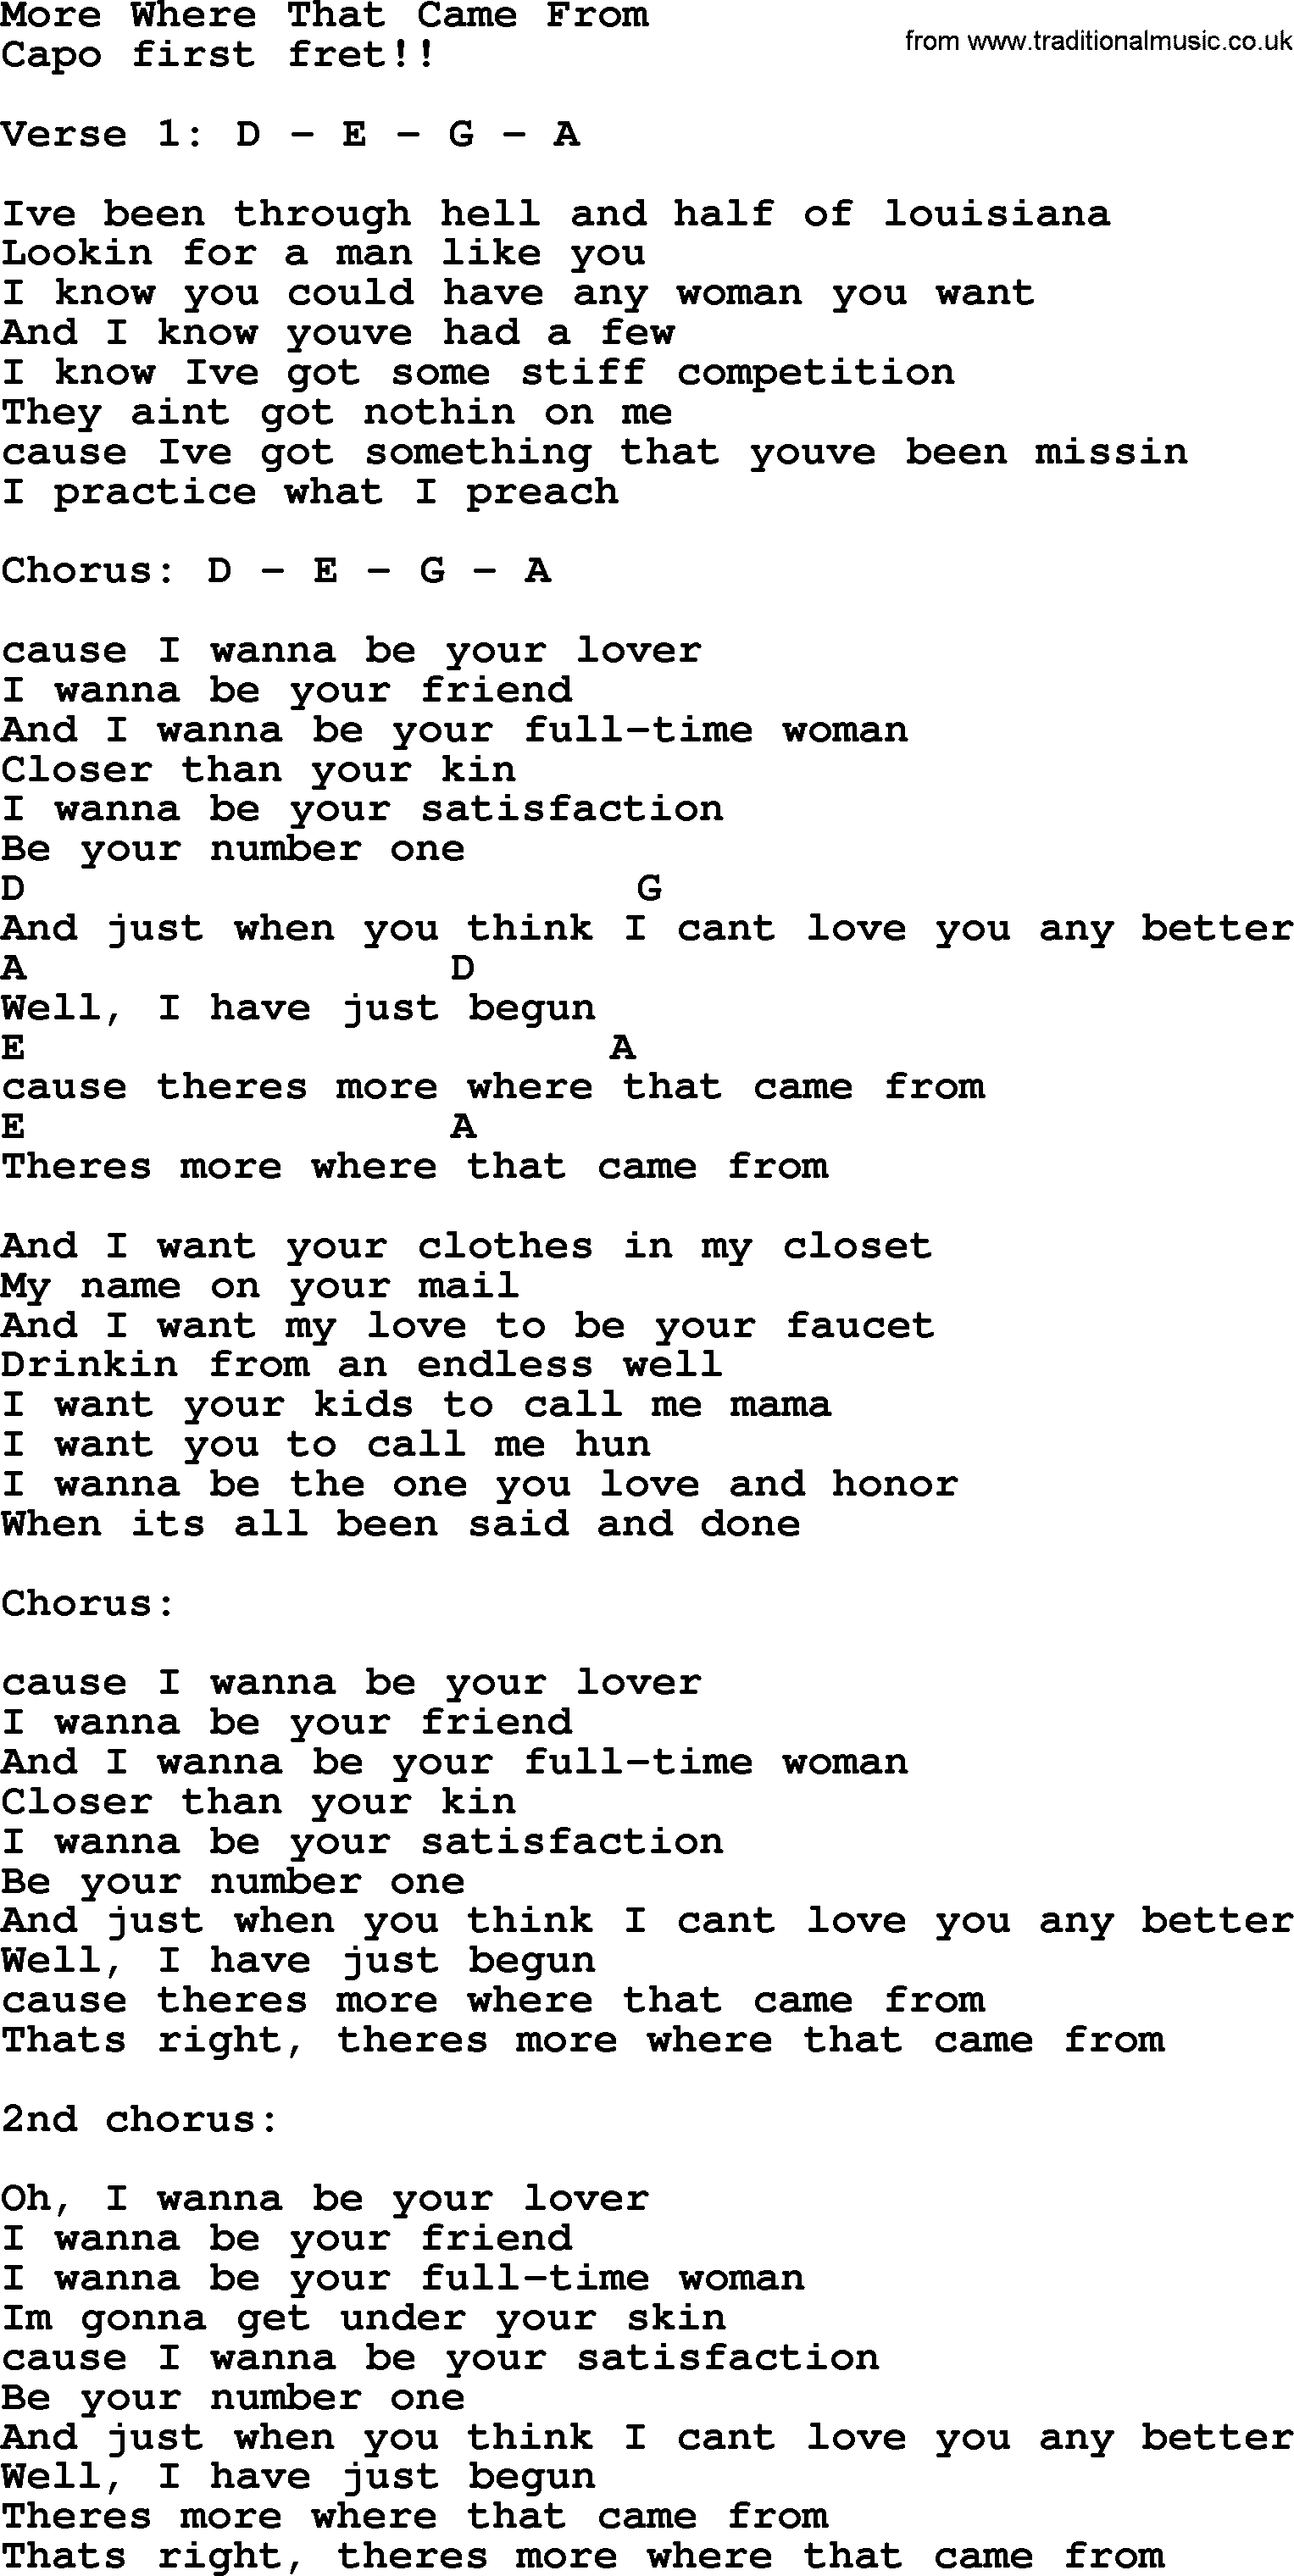 Dolly Parton song More Where That Came From, lyrics and chords